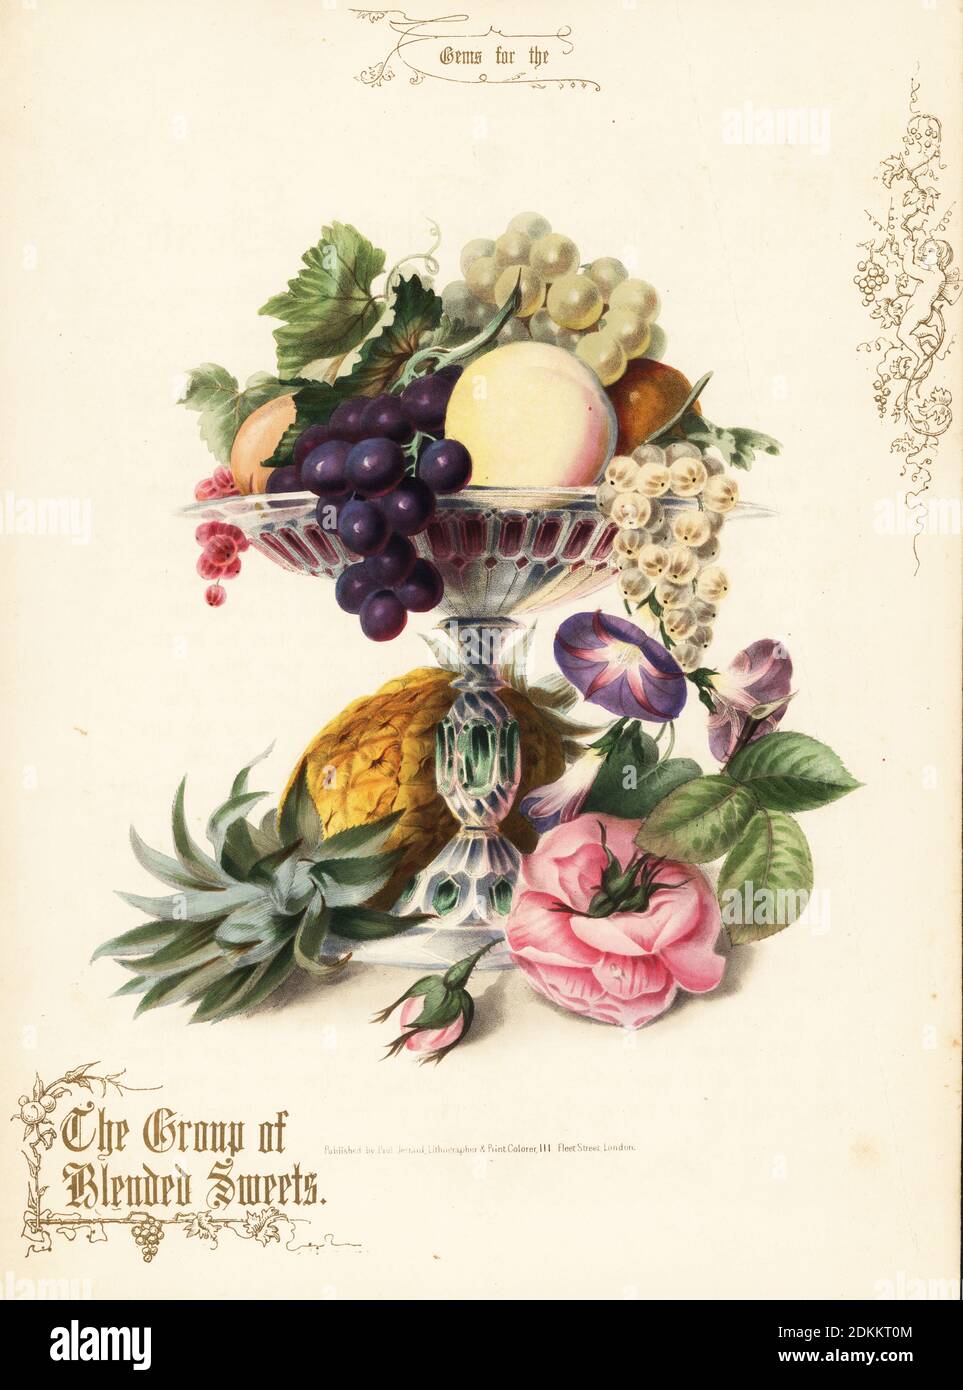 Bouquet of pineapple, grapes, peach, rose, morning glory and glass vase. The Group of Blended Sweets. Hand-coloured lithograph with gold calligraphy by Paul Jerrard from his own Gems for the Drawing Room, Paul Jerrard, 111 Fleet Street, London, 1852. Jerrard was a Victorian lithographer and print colourer active in London. Stock Photo